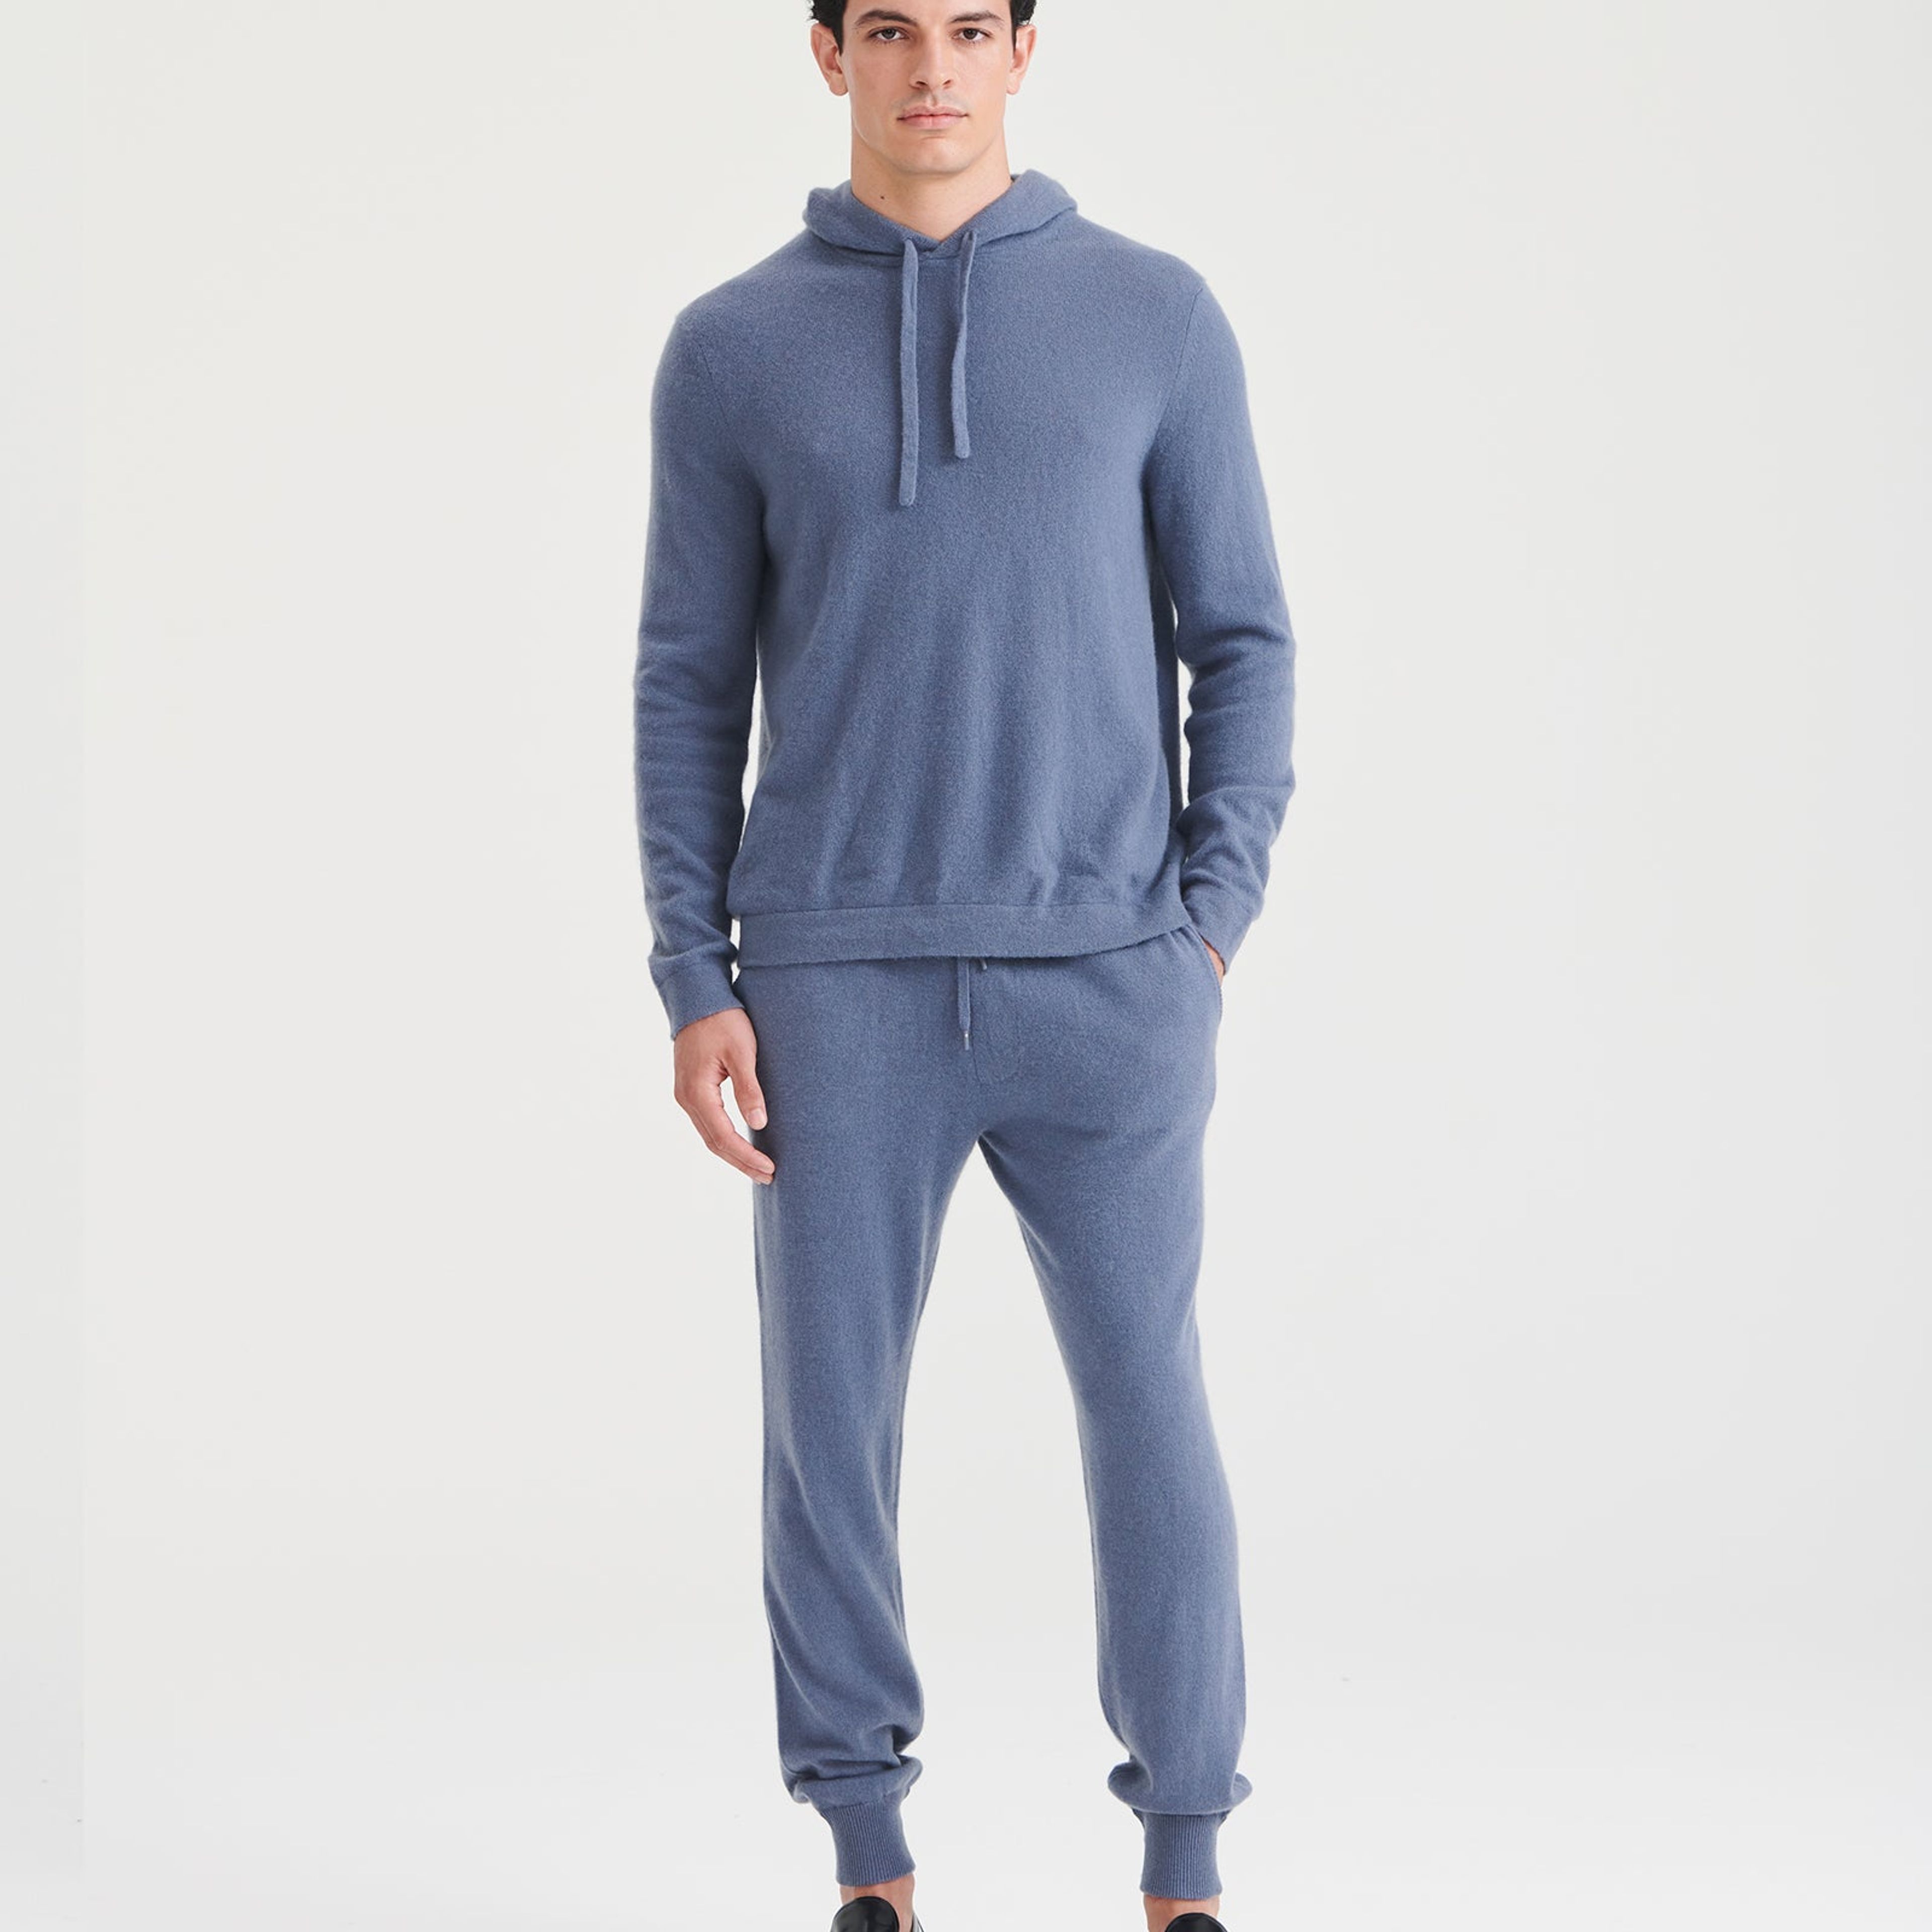 Off-Duty Cashmere Jogger